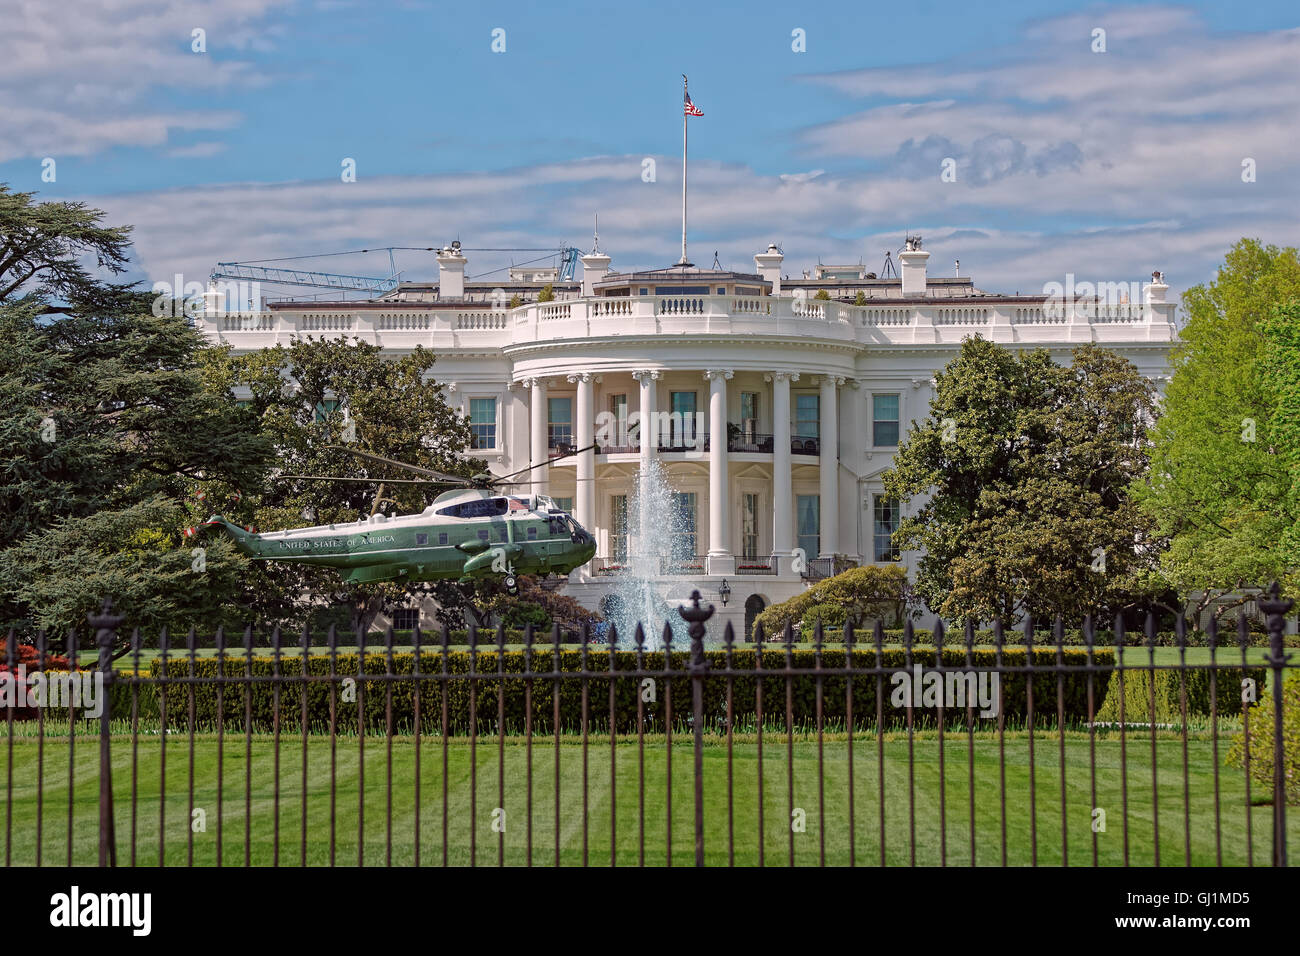 Helicopter was seen near the White House in Washington D.C., USA. The building is the workplace and residence for the US President. The first President who lives there was John Adams. Stock Photo